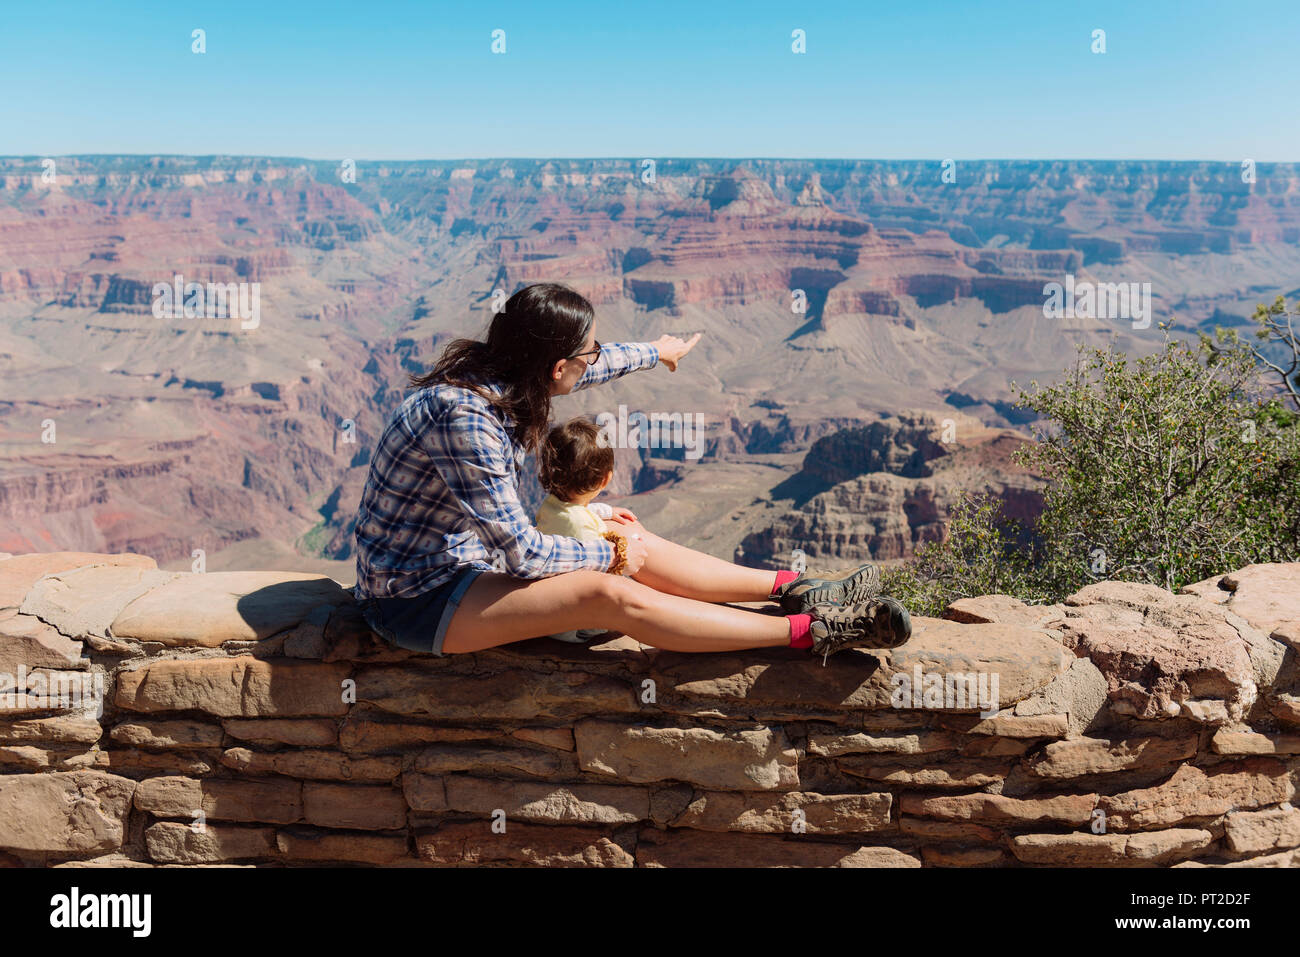 USA, Arizona, Grand Canyon National Park, Grand Canyon, mother and little daughter looking at view Stock Photo